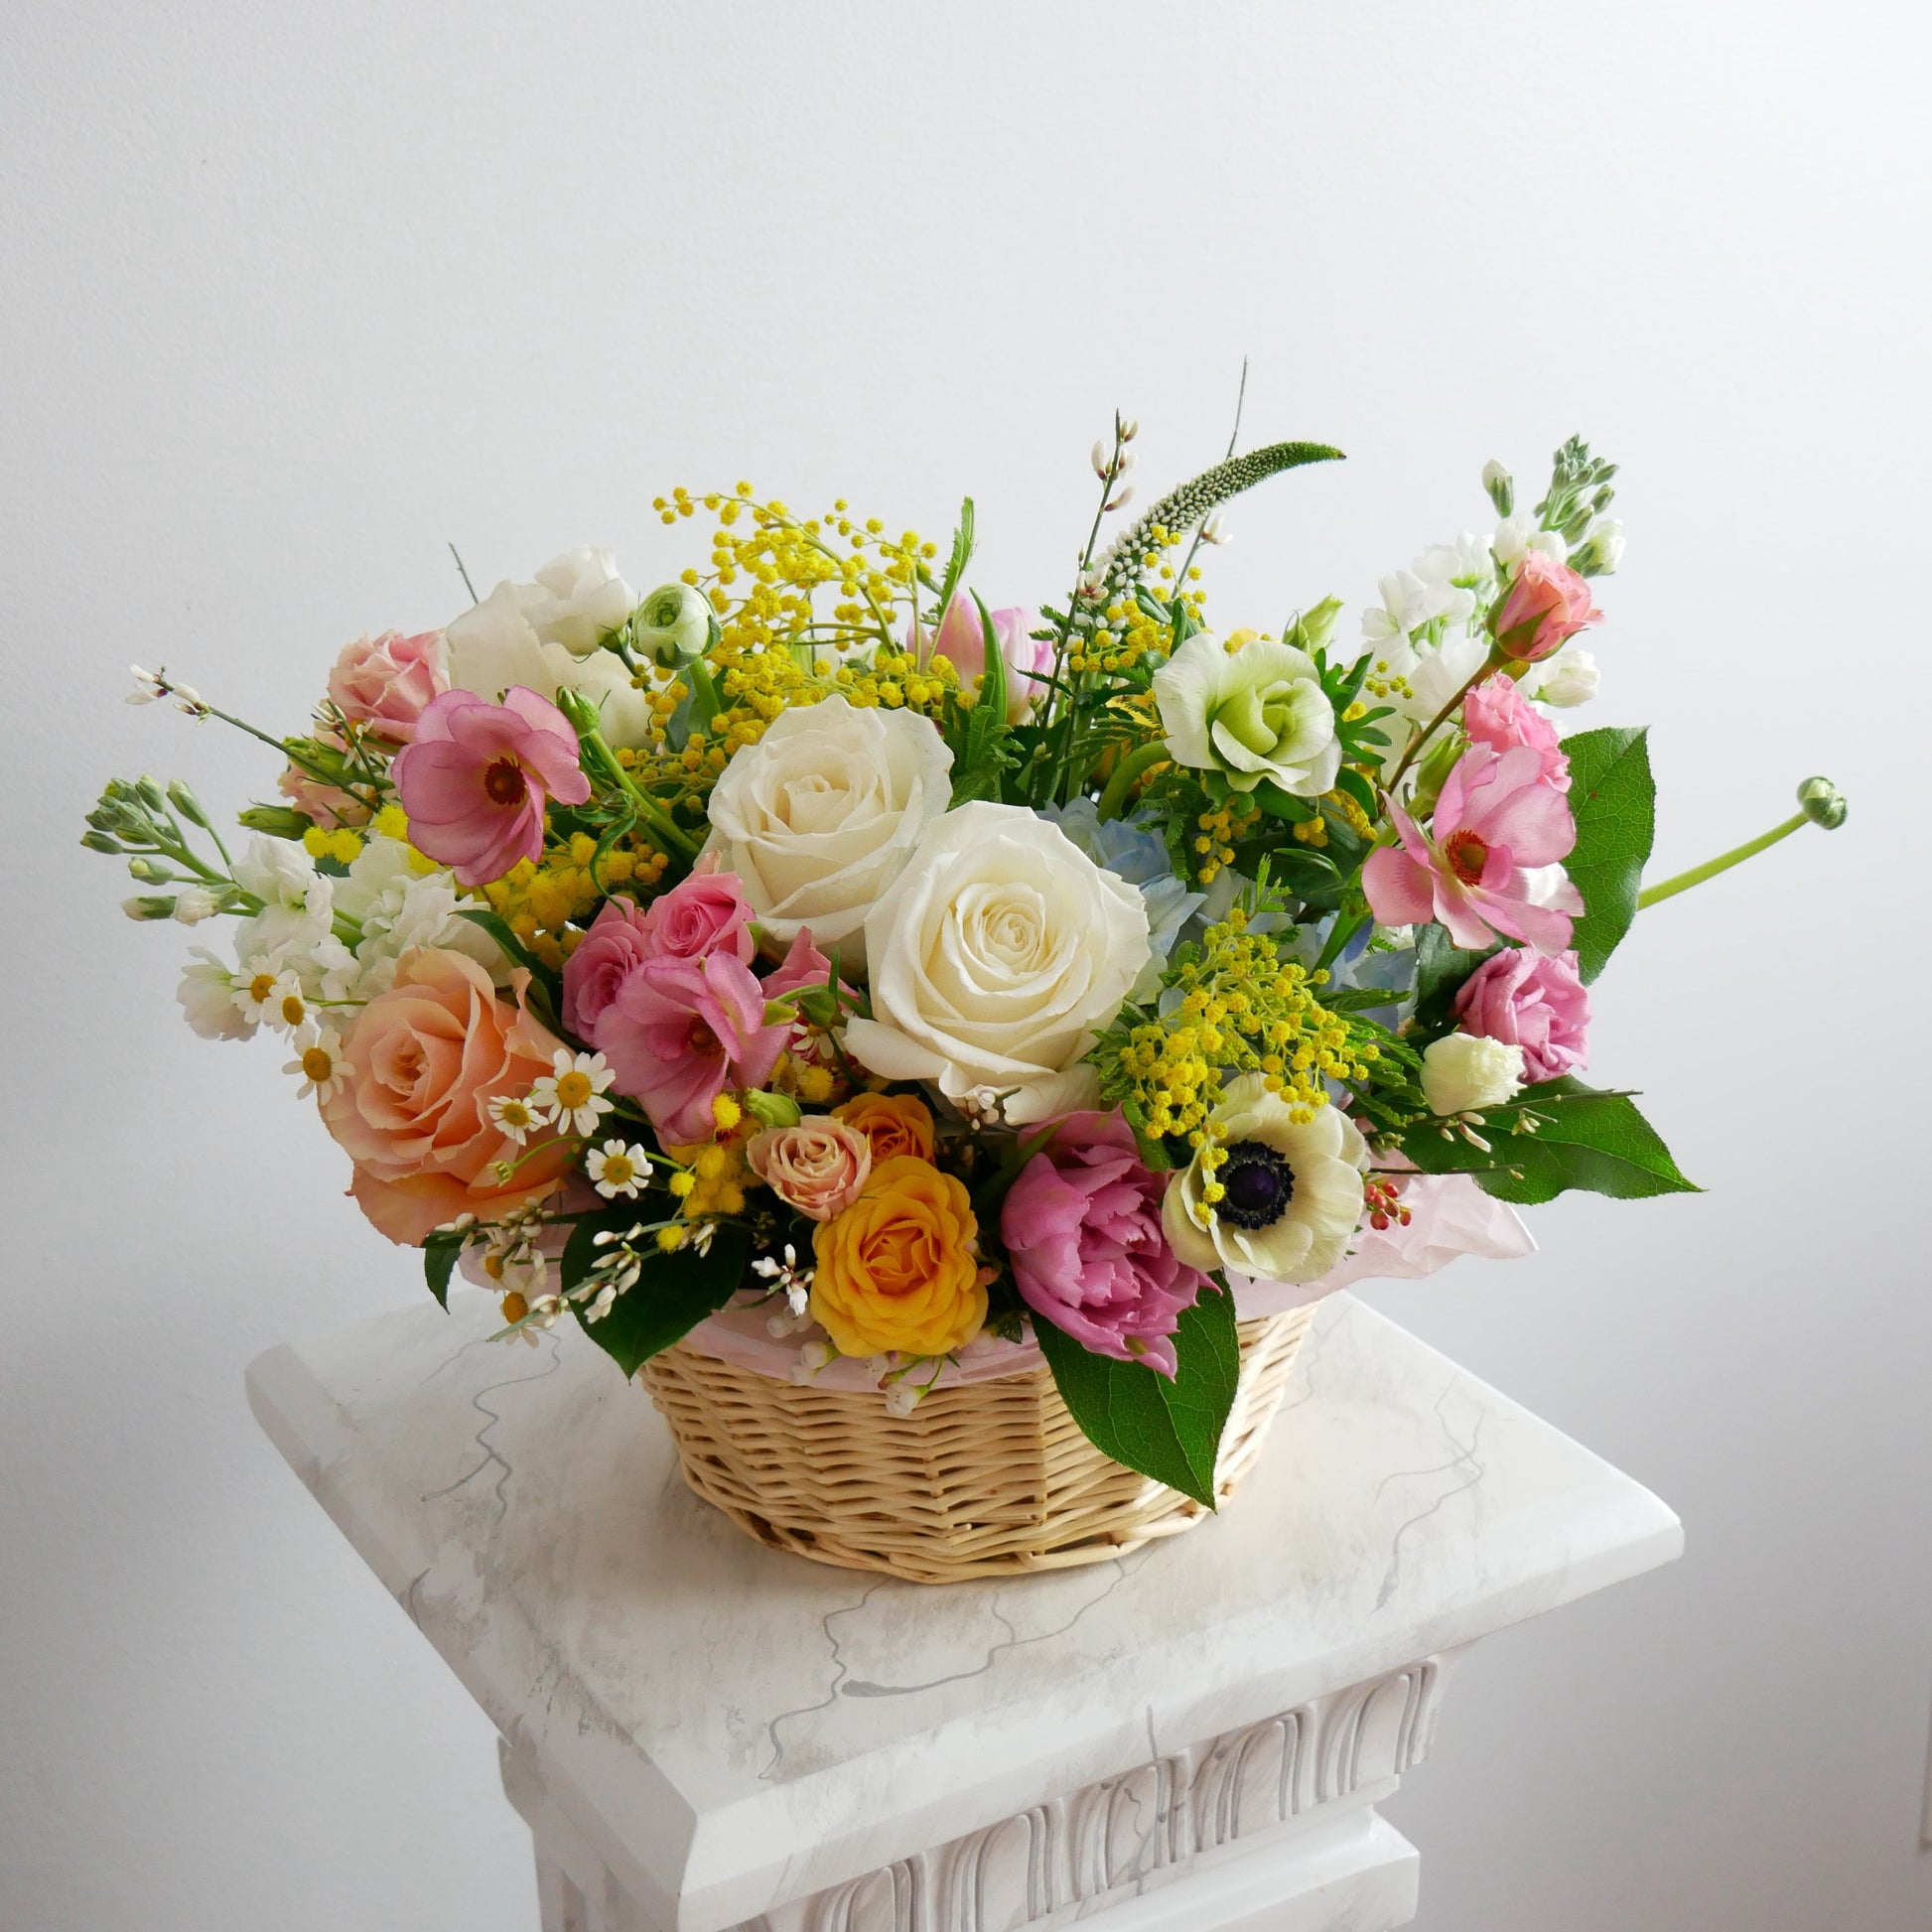 Spring medium size flower basket featuring white roses, mimosa, anemone, pink ranunculus, tulips and more